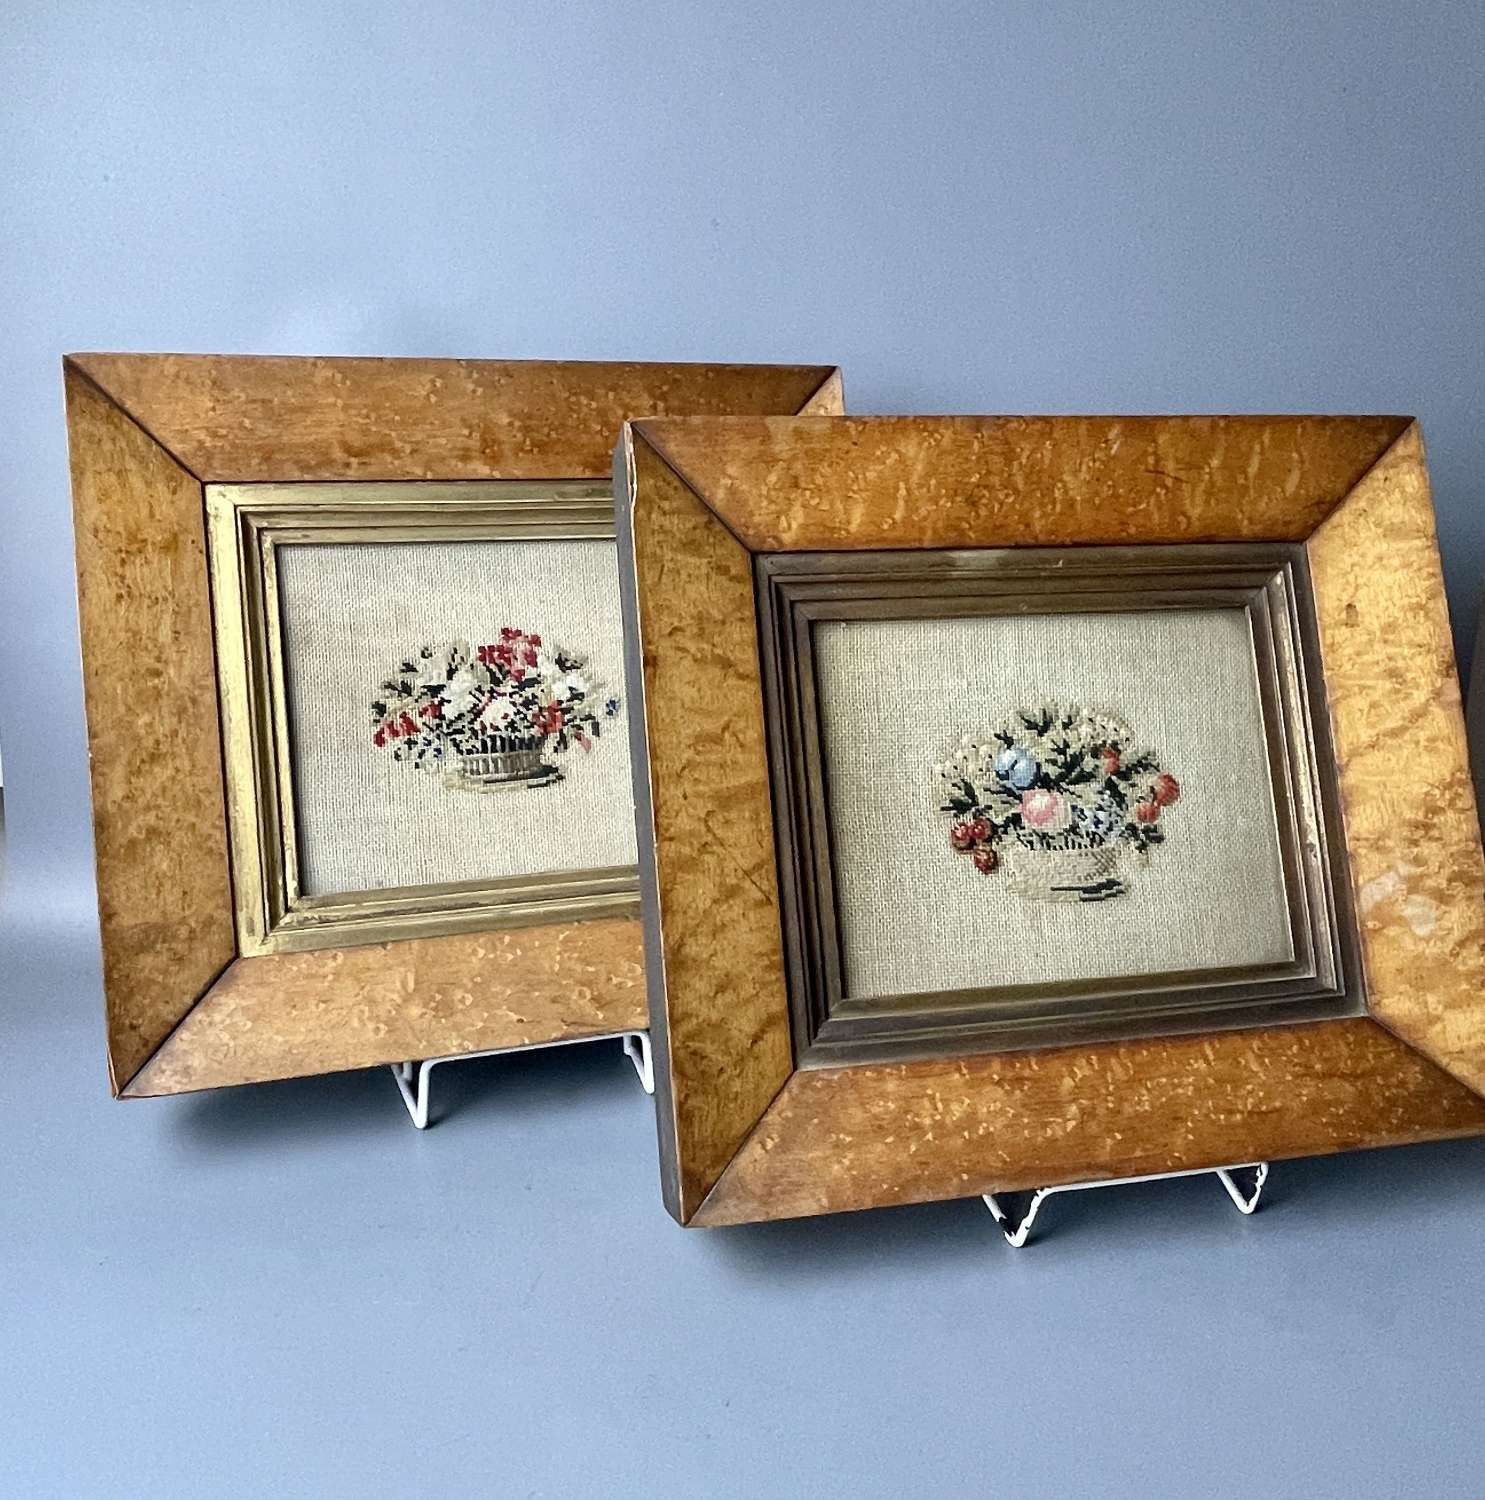 Pair of Victorian Floral Needlework Pictures with Burr Maple Frames